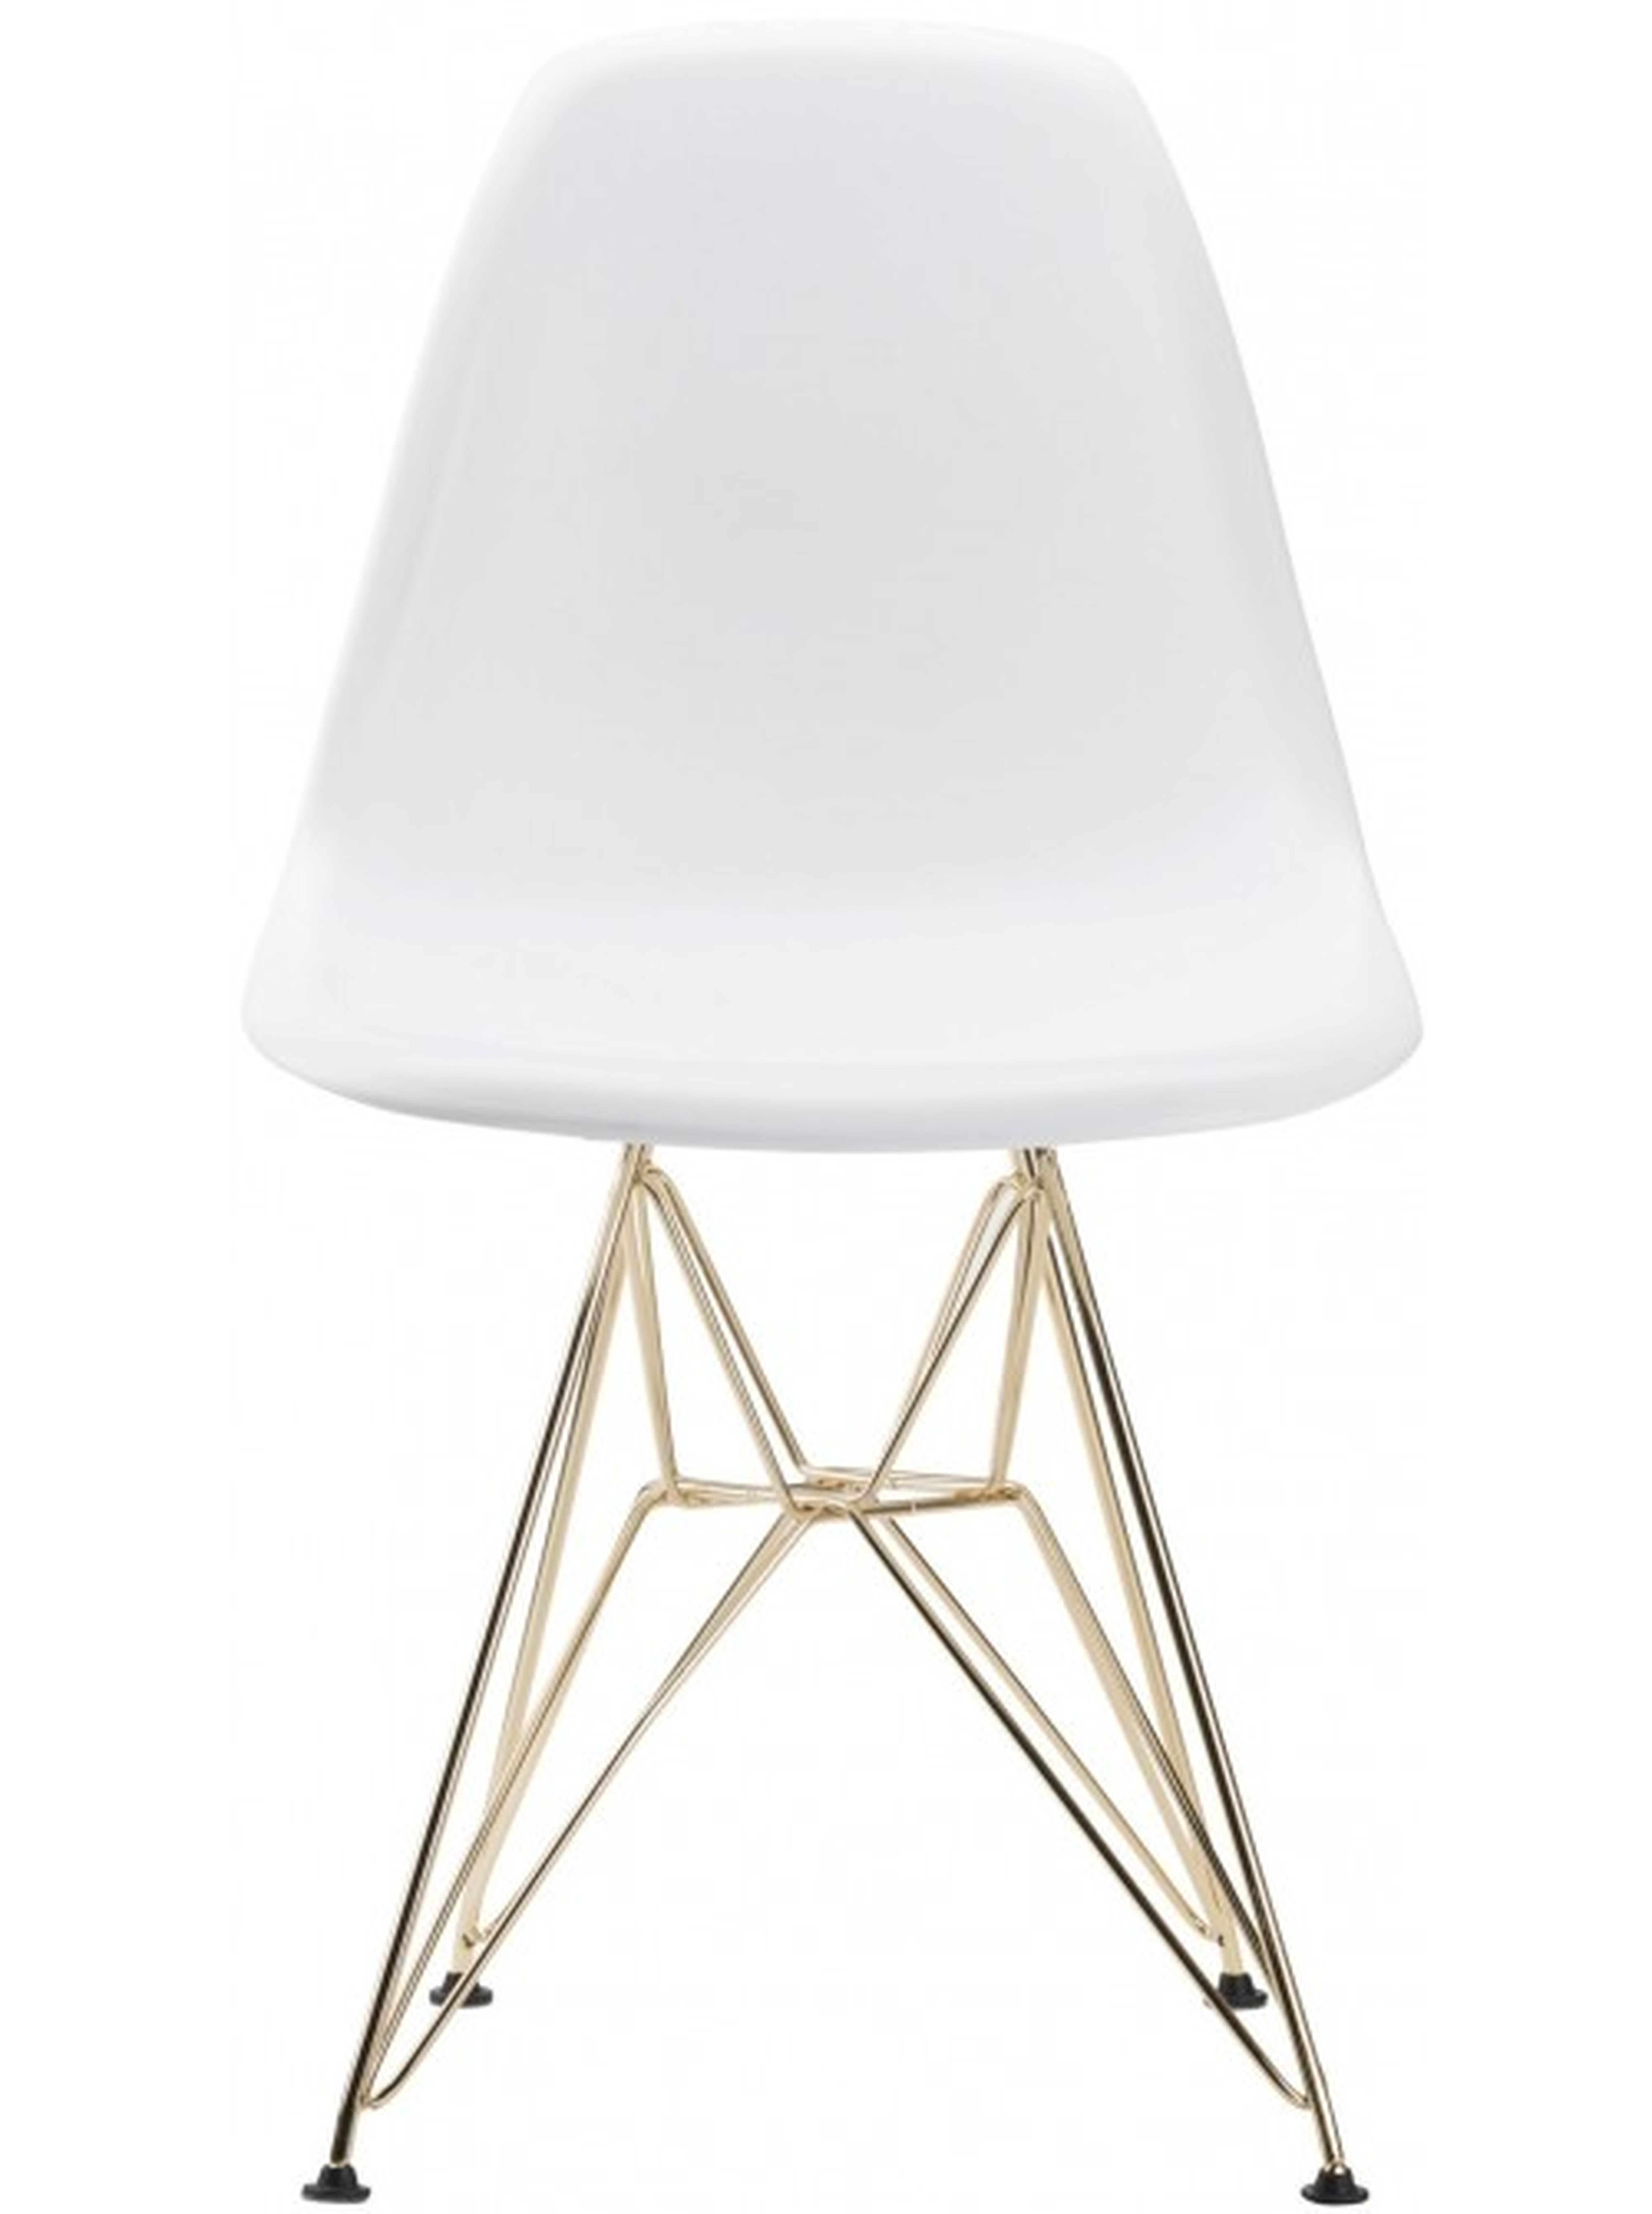 Haven Dining Chair, White and Gold - Lulu and Georgia